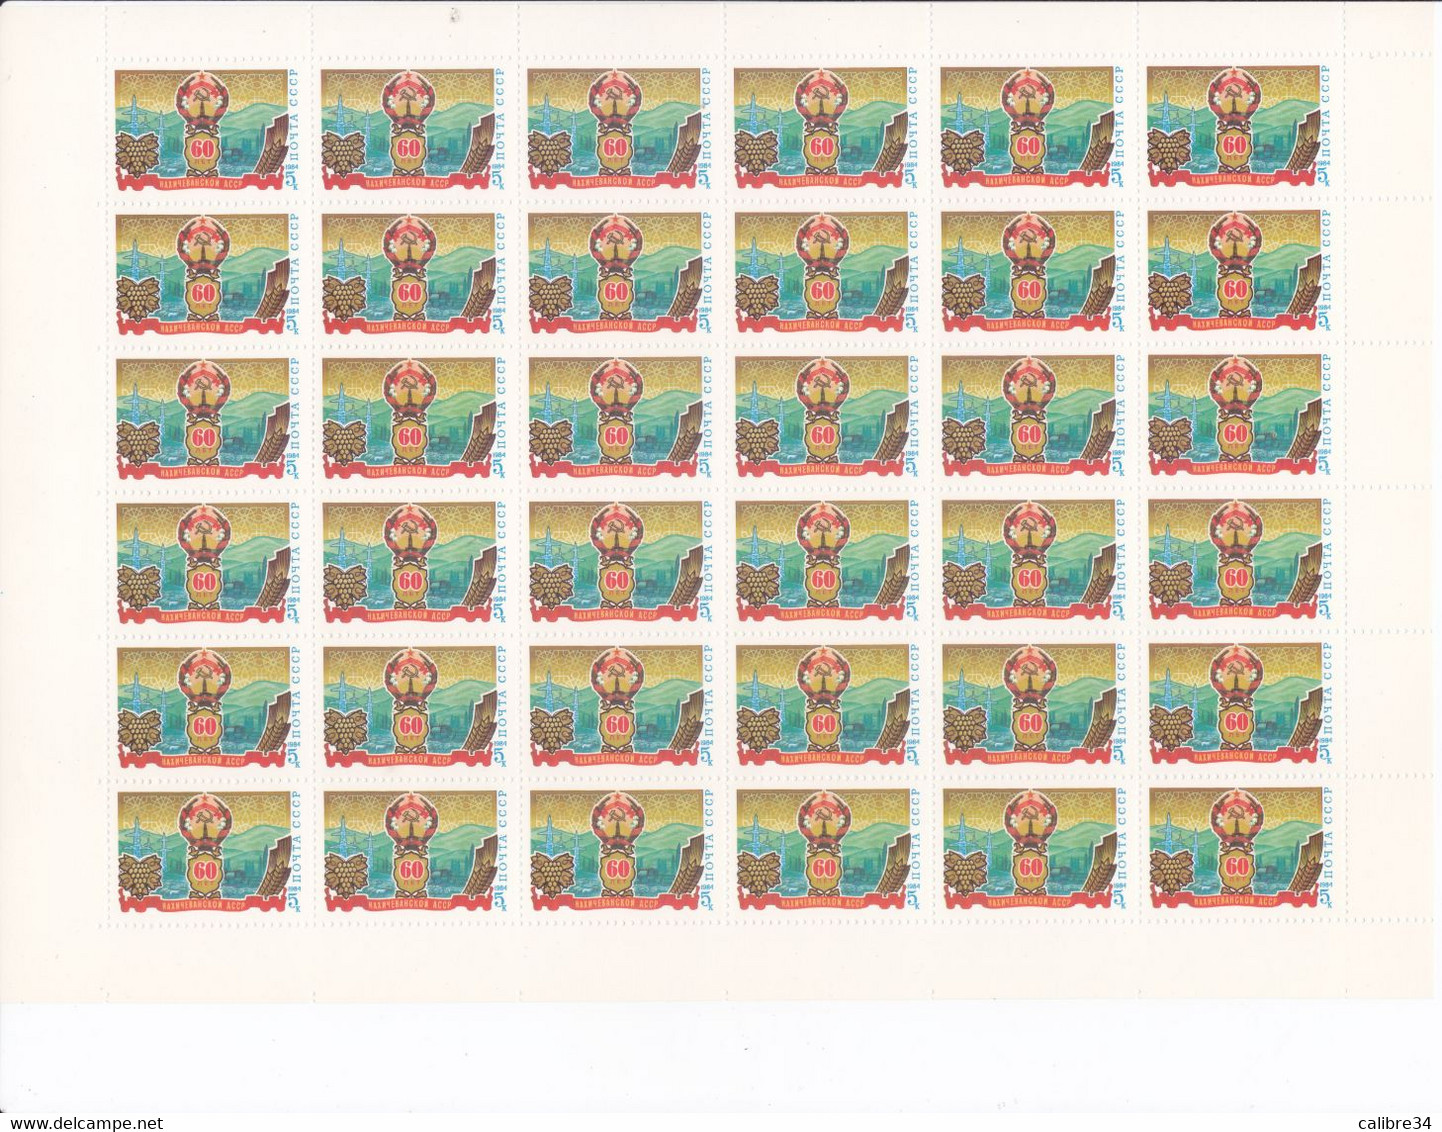 URSS Feuille Complète      60th Anniversary Of Nakhichevan   1984 - Full Sheets